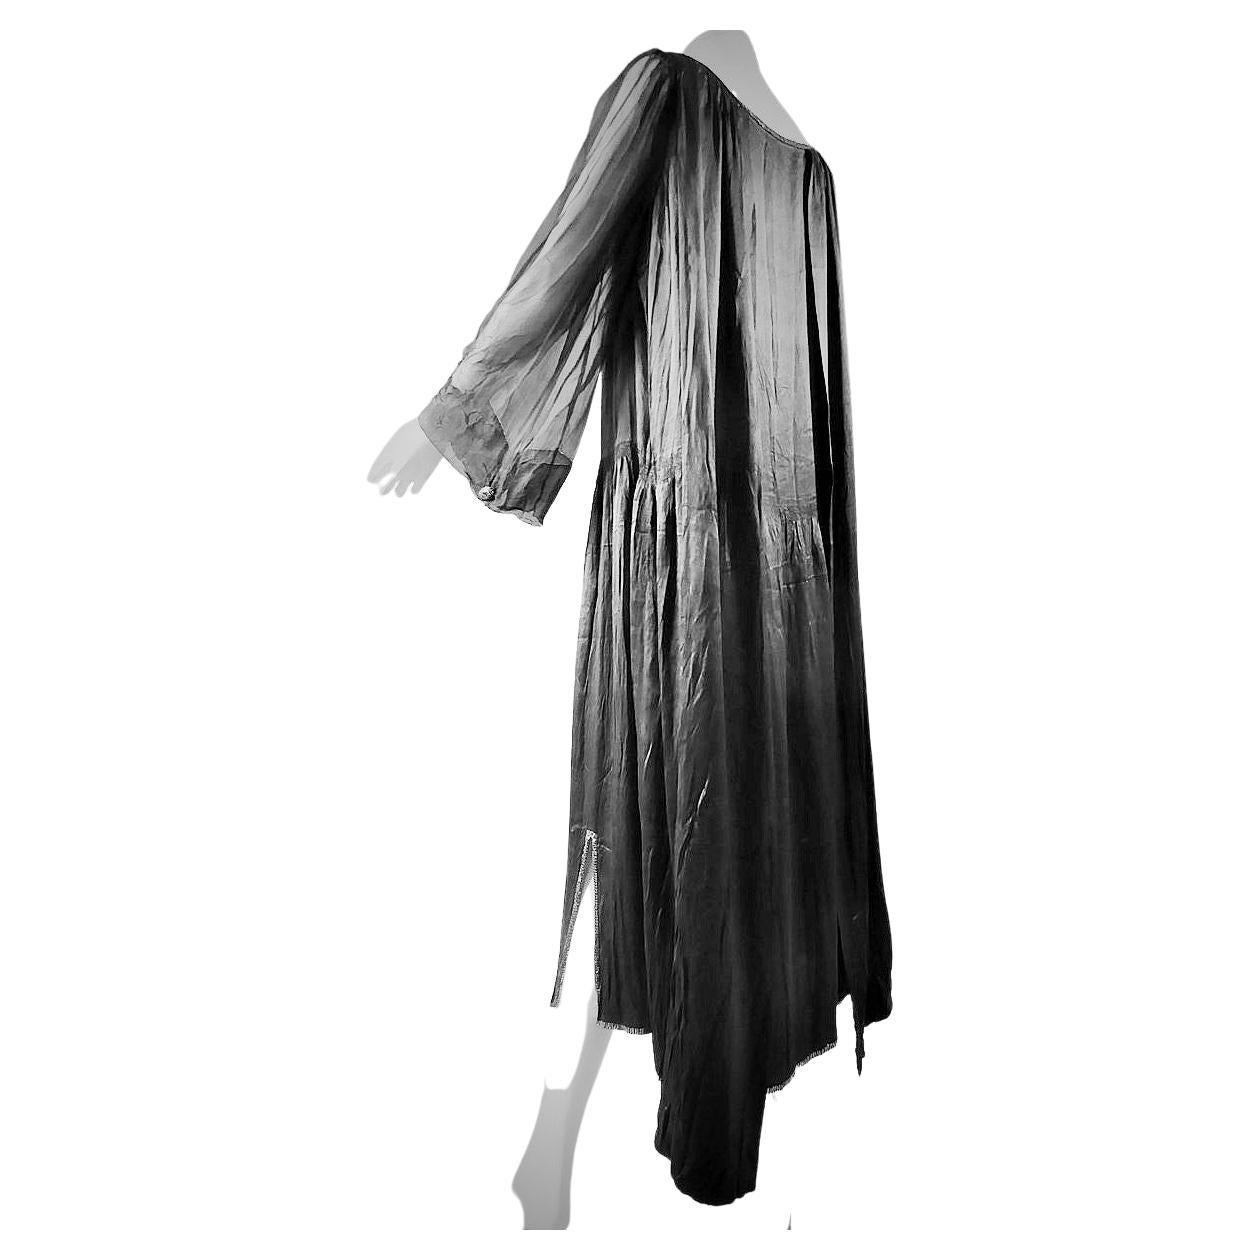 A Rare and Early Jeanne Lanvin Haute Couture Chiffon and satin Dress Winter 1920